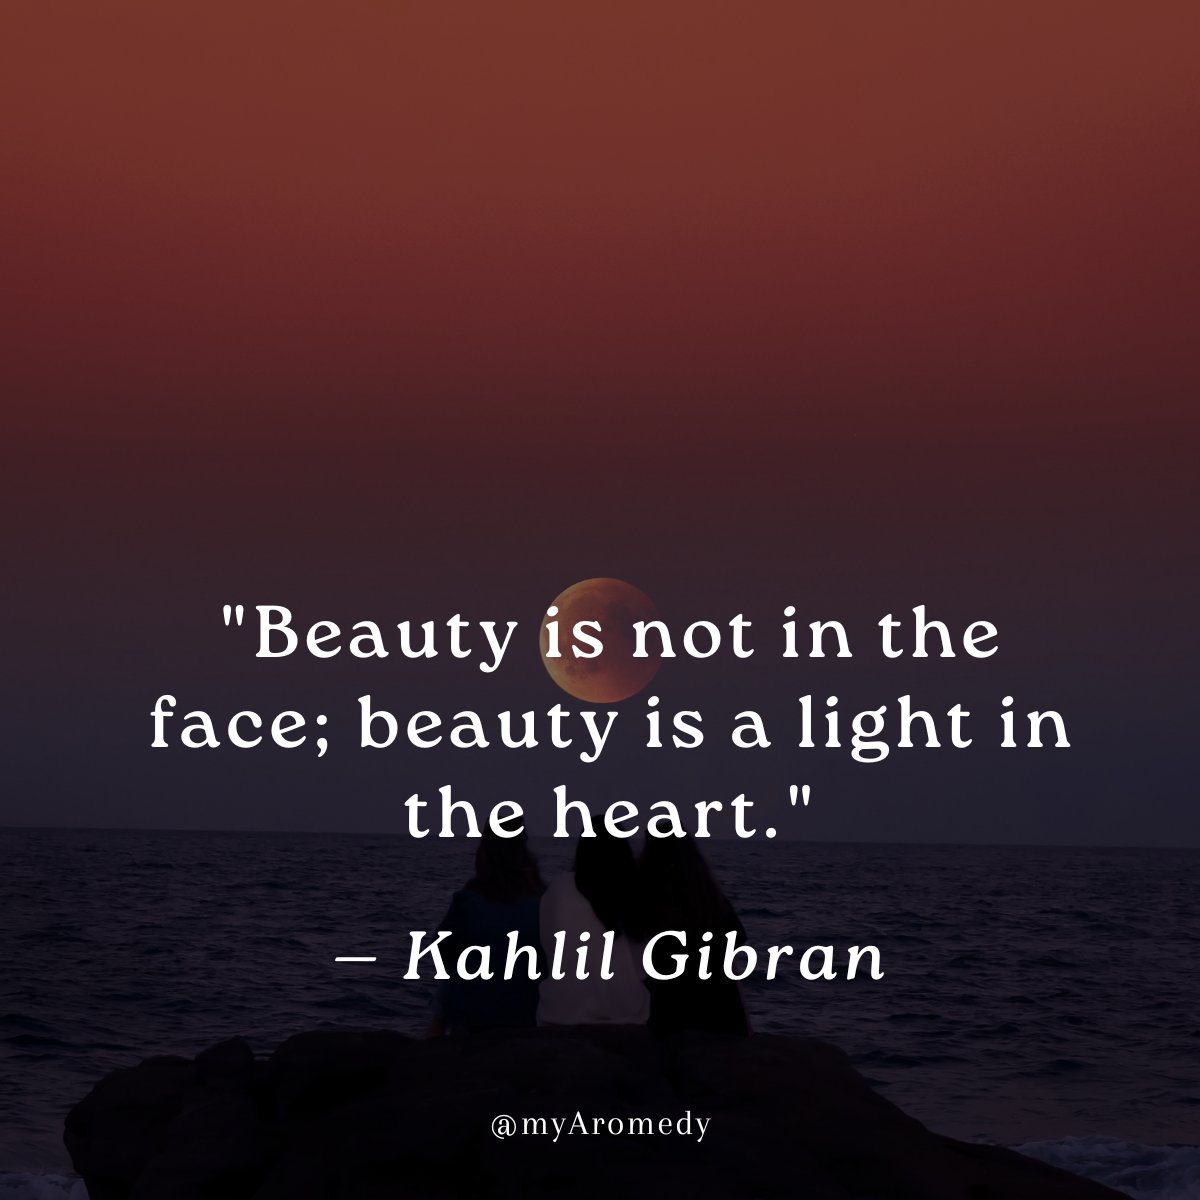 Shine from within and let your heart's beauty show. 💖 #InnerBeauty #Aromedy #WellnessLife #BeautyCare #lifestyler

bit.ly/3KnFqGO